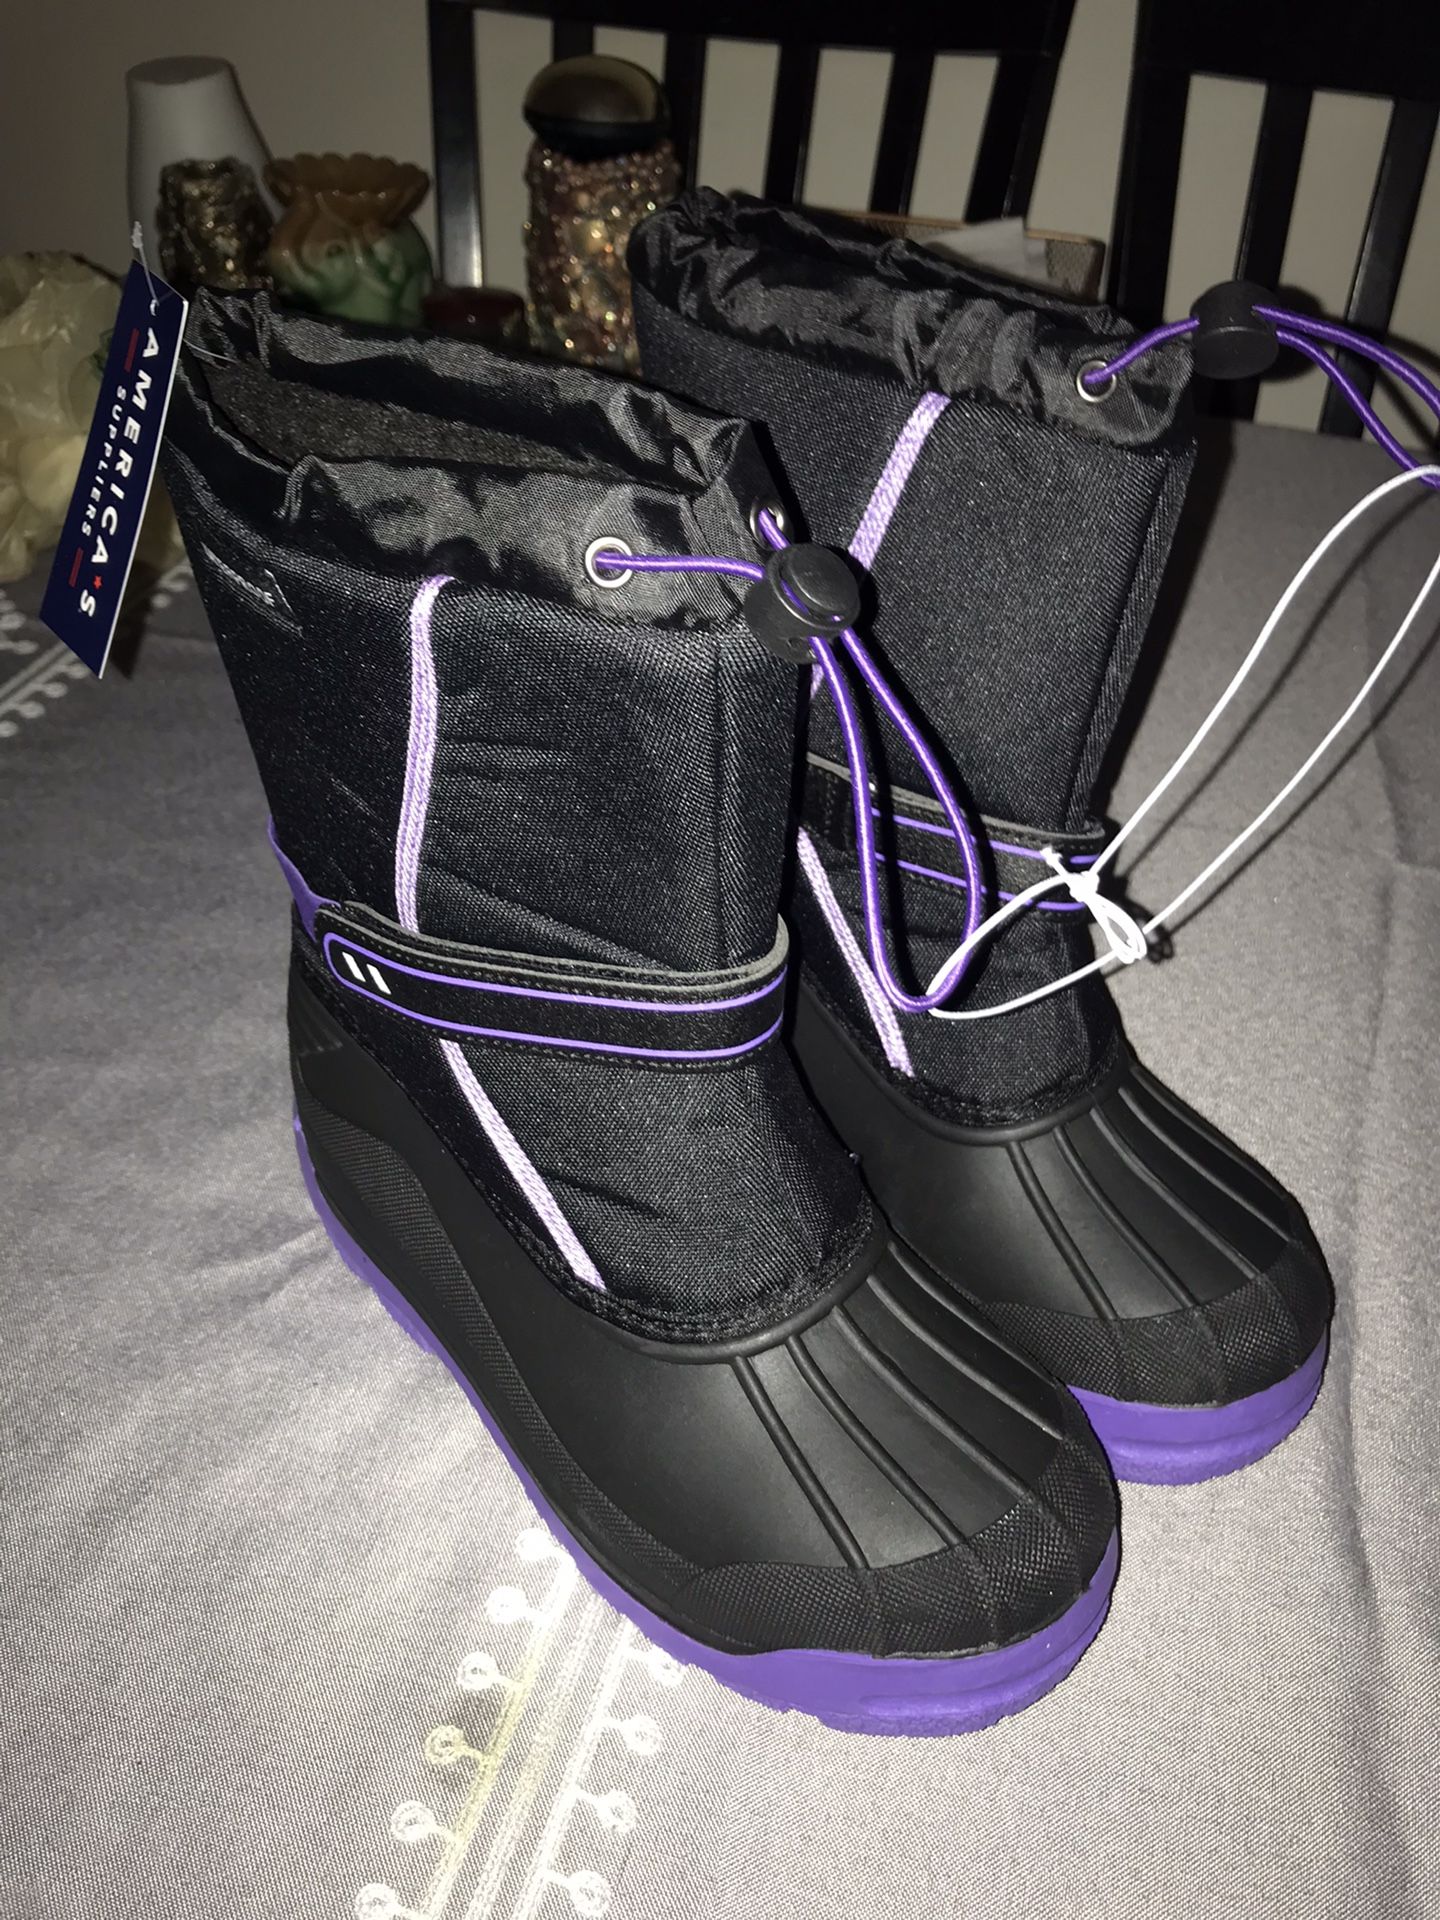 Girls Snow Boots Sz 6 New With Tag 